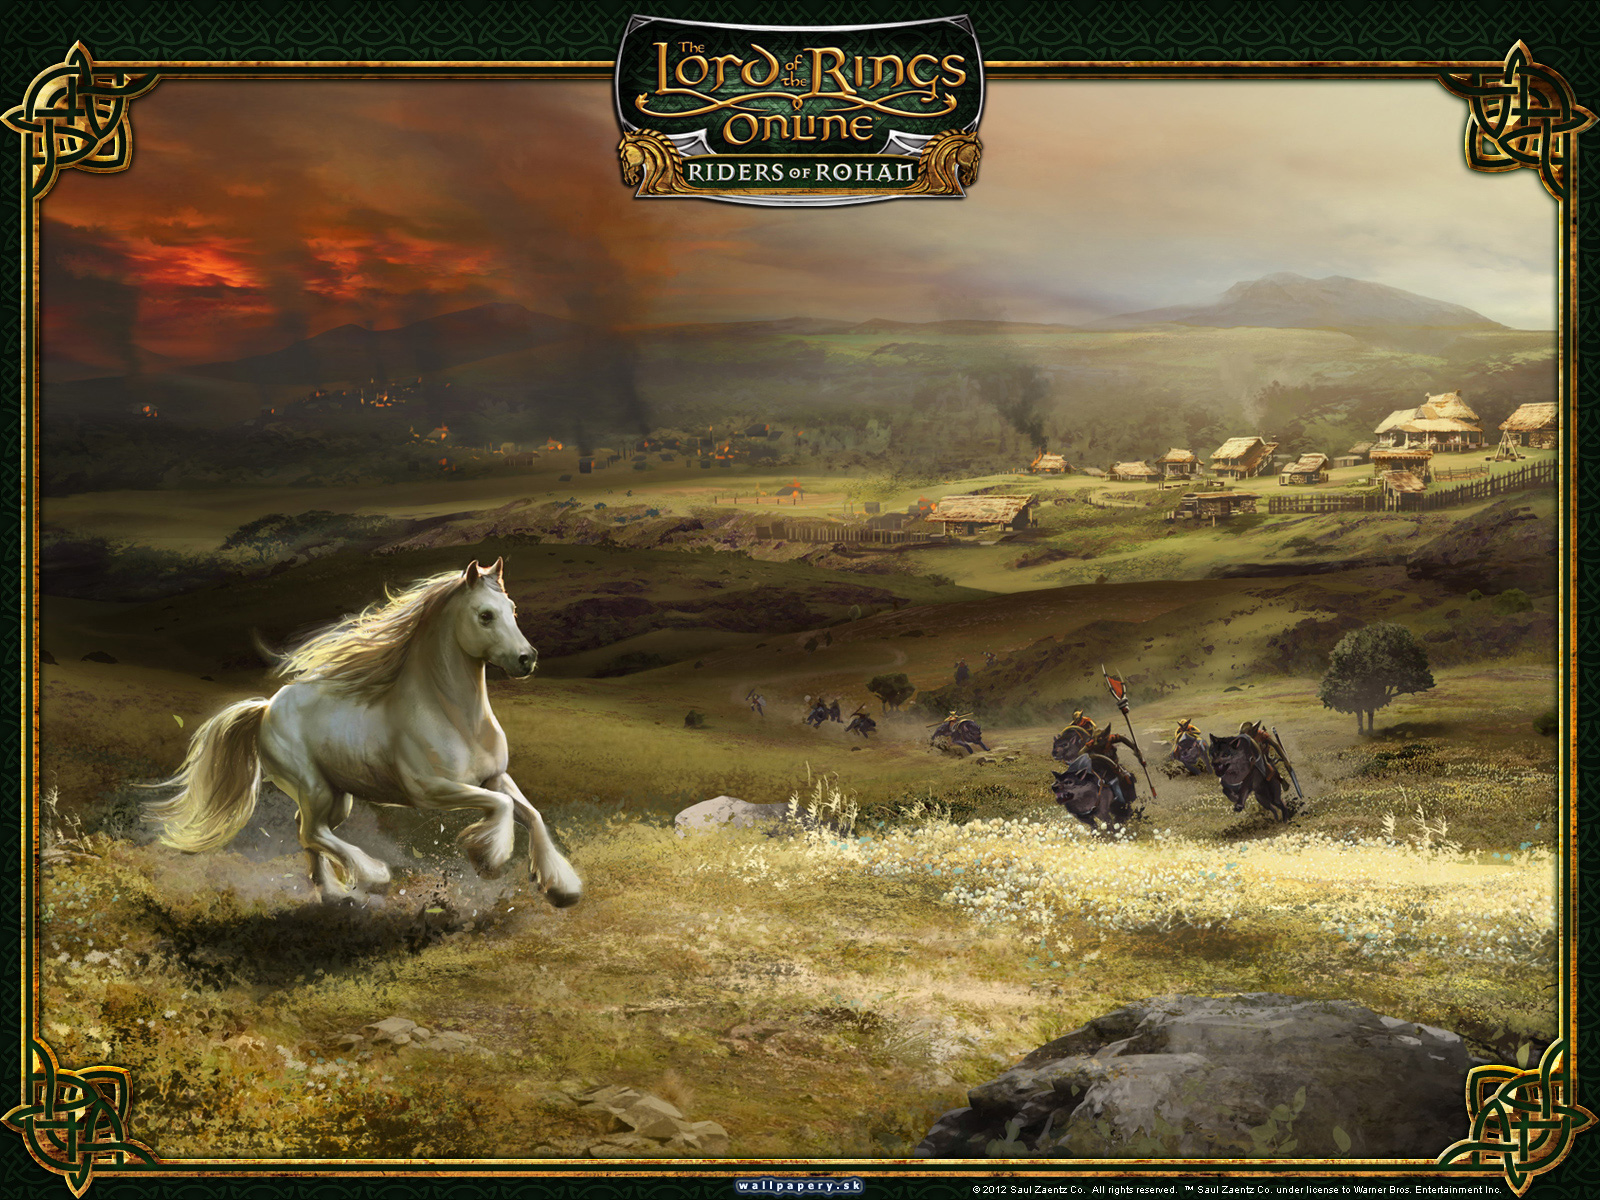 The Lord of the Rings Online: Riders of Rohan - wallpaper 2